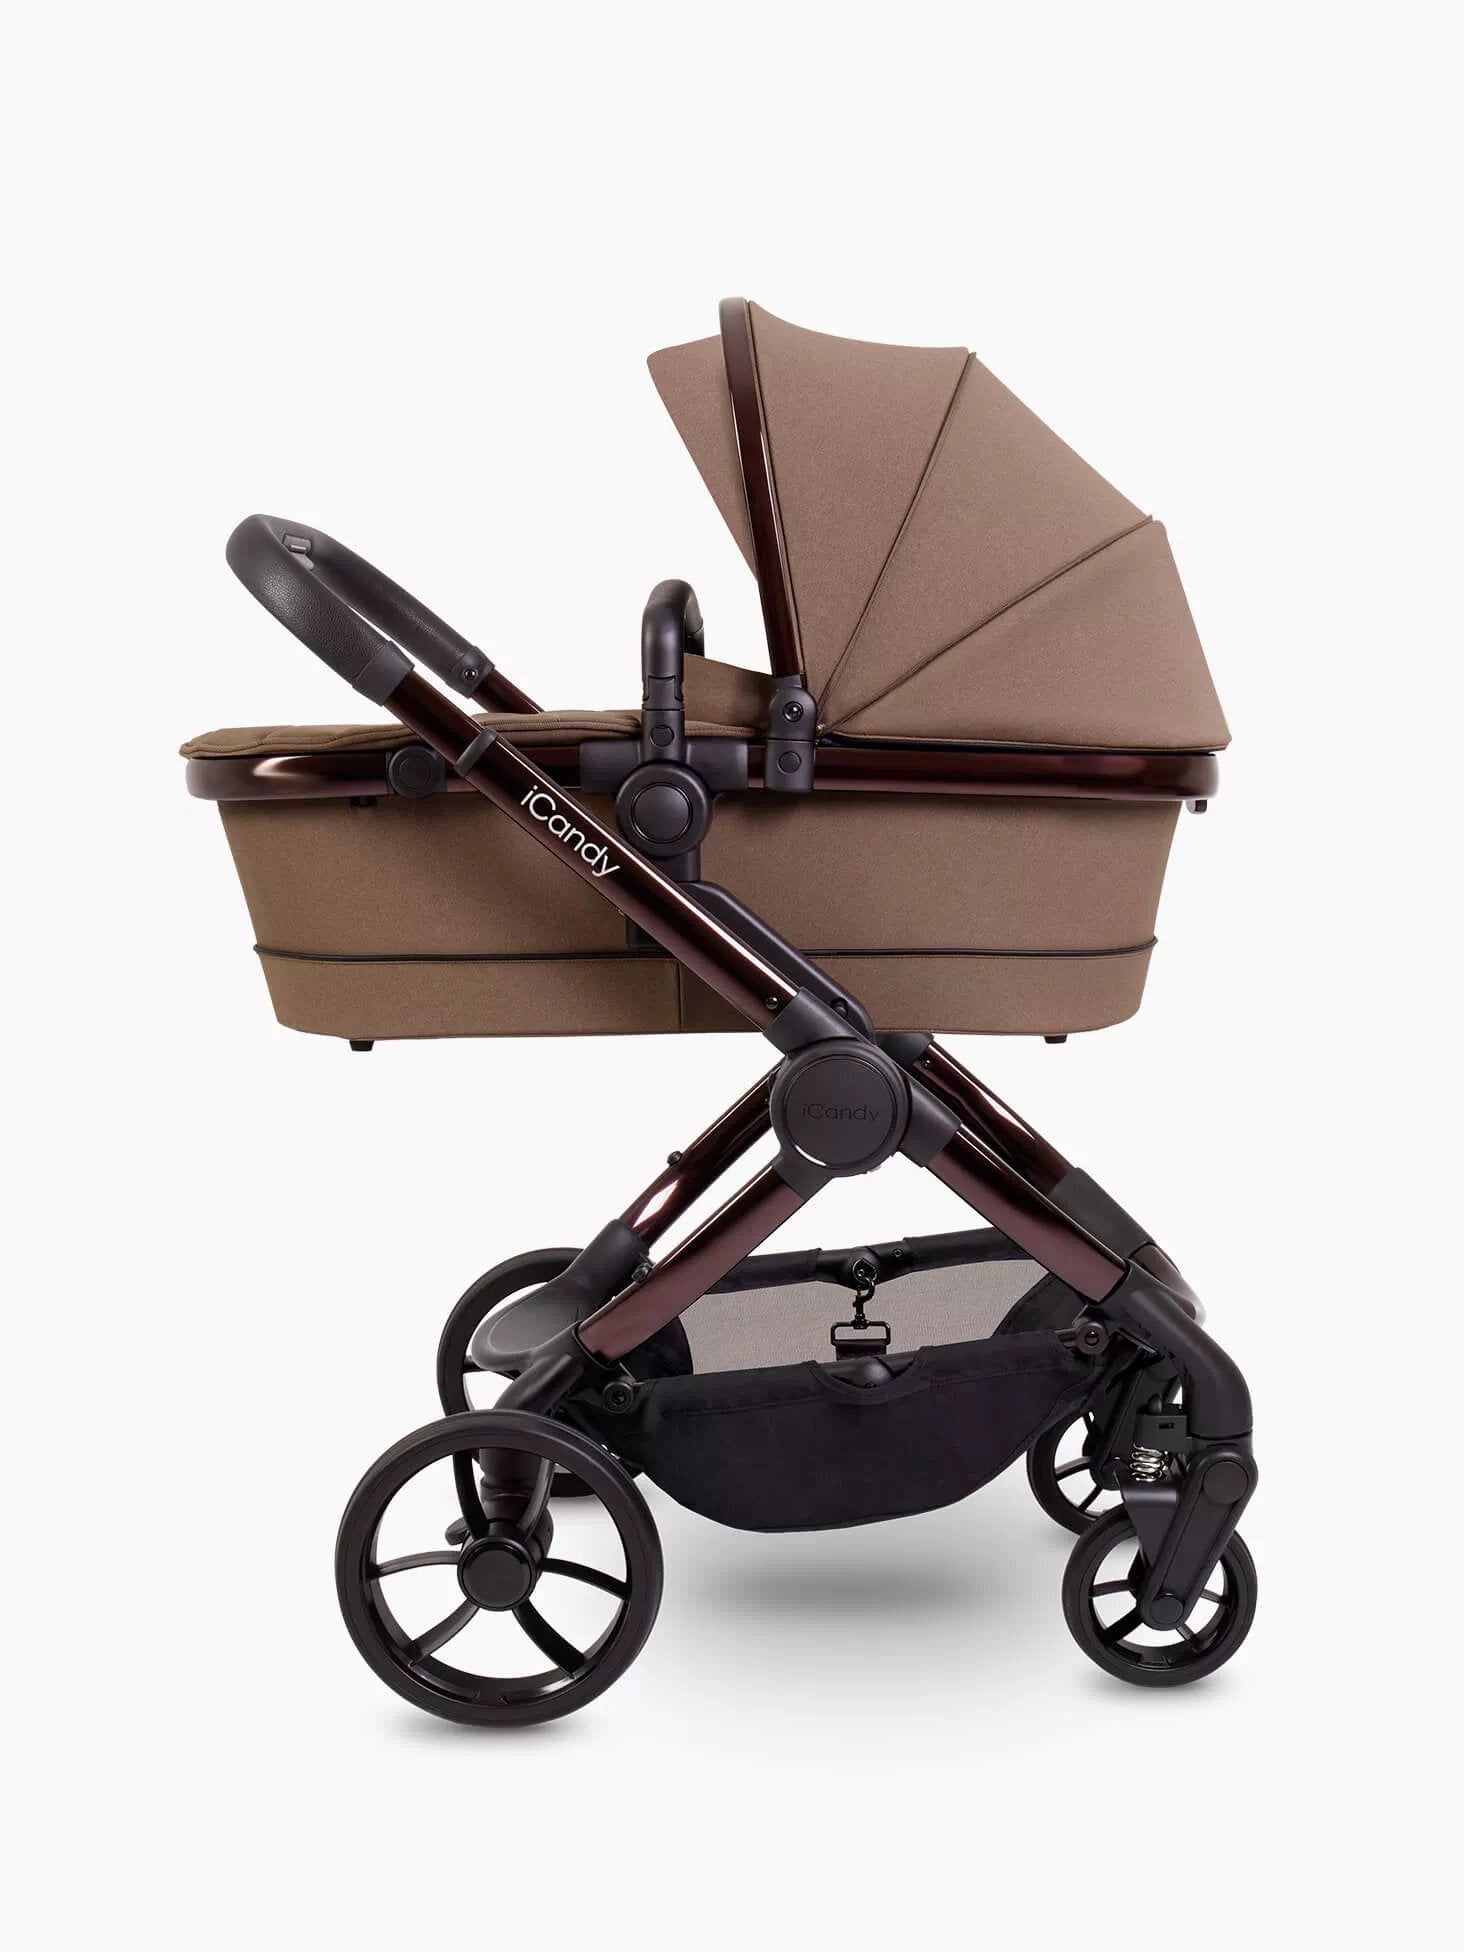 Icandy Peach 7 Trolley dedalking, coco - ensemble complet